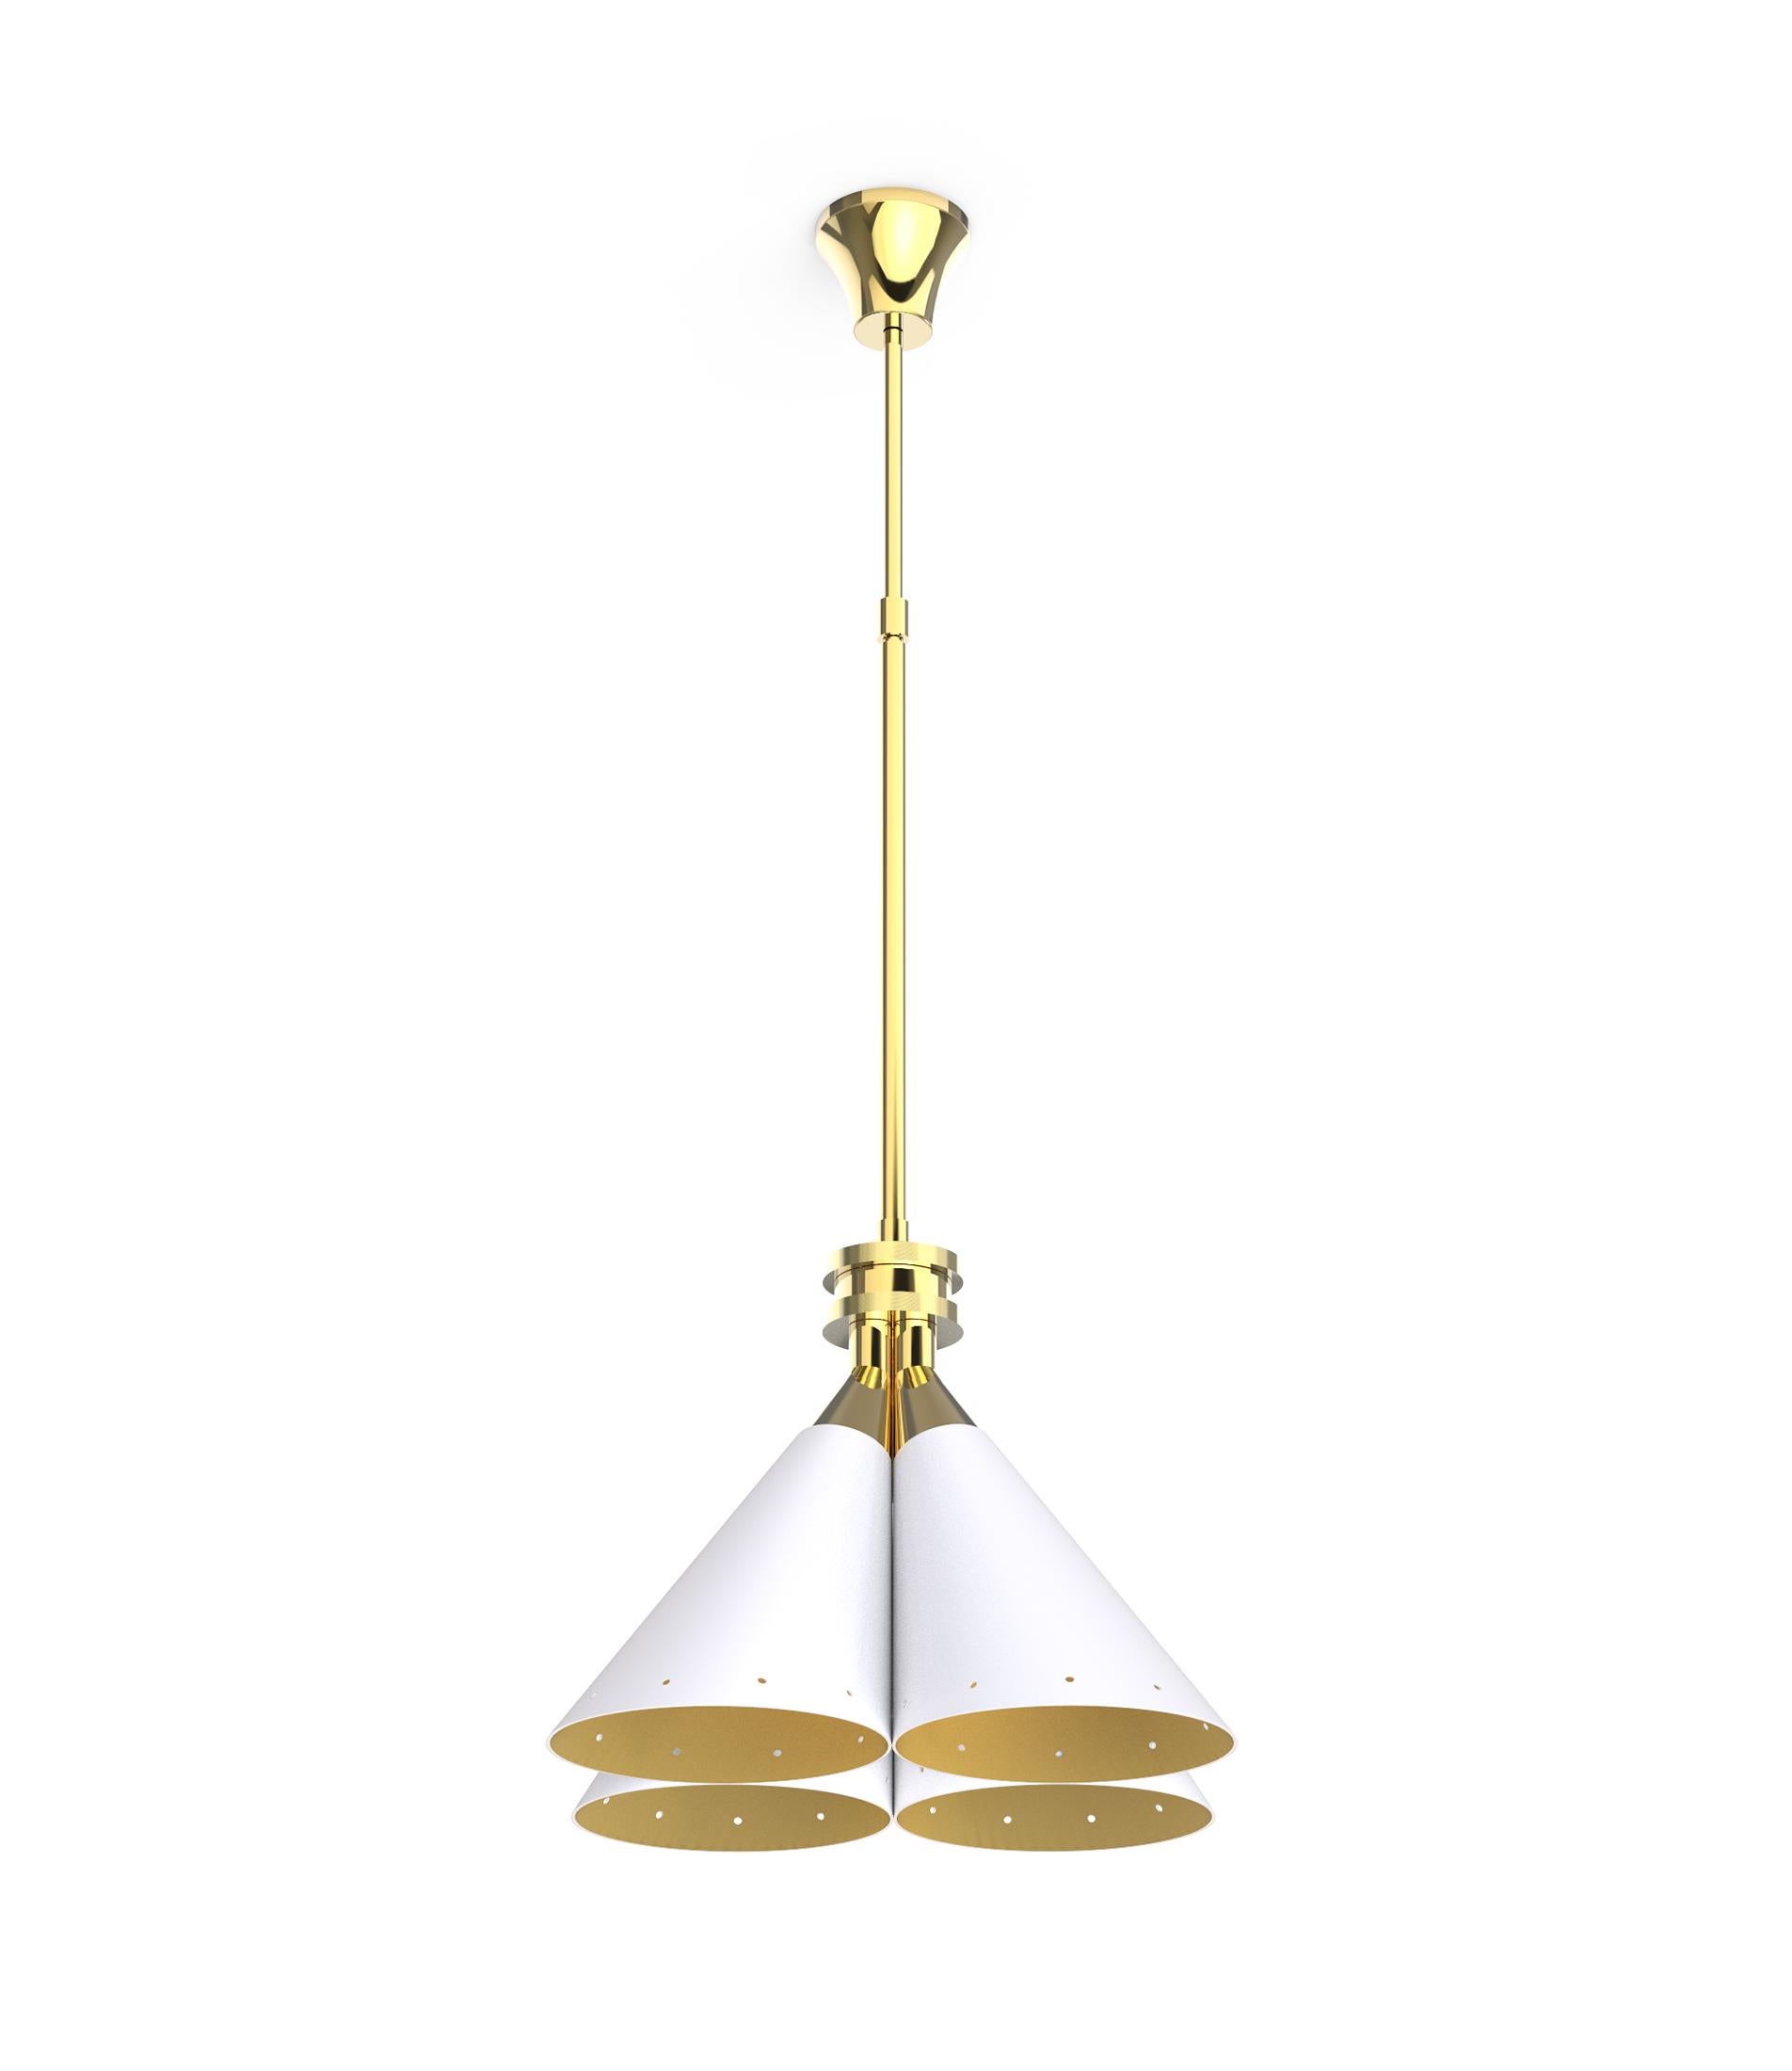 Inspired by a flower bouquet, delightfull designers designed Madeleine, an industrial pendant lighting. With four cone swiveling pinhole lights, this brass pendant lamp features a matte white interior and a gold powder paint inside finishing. This